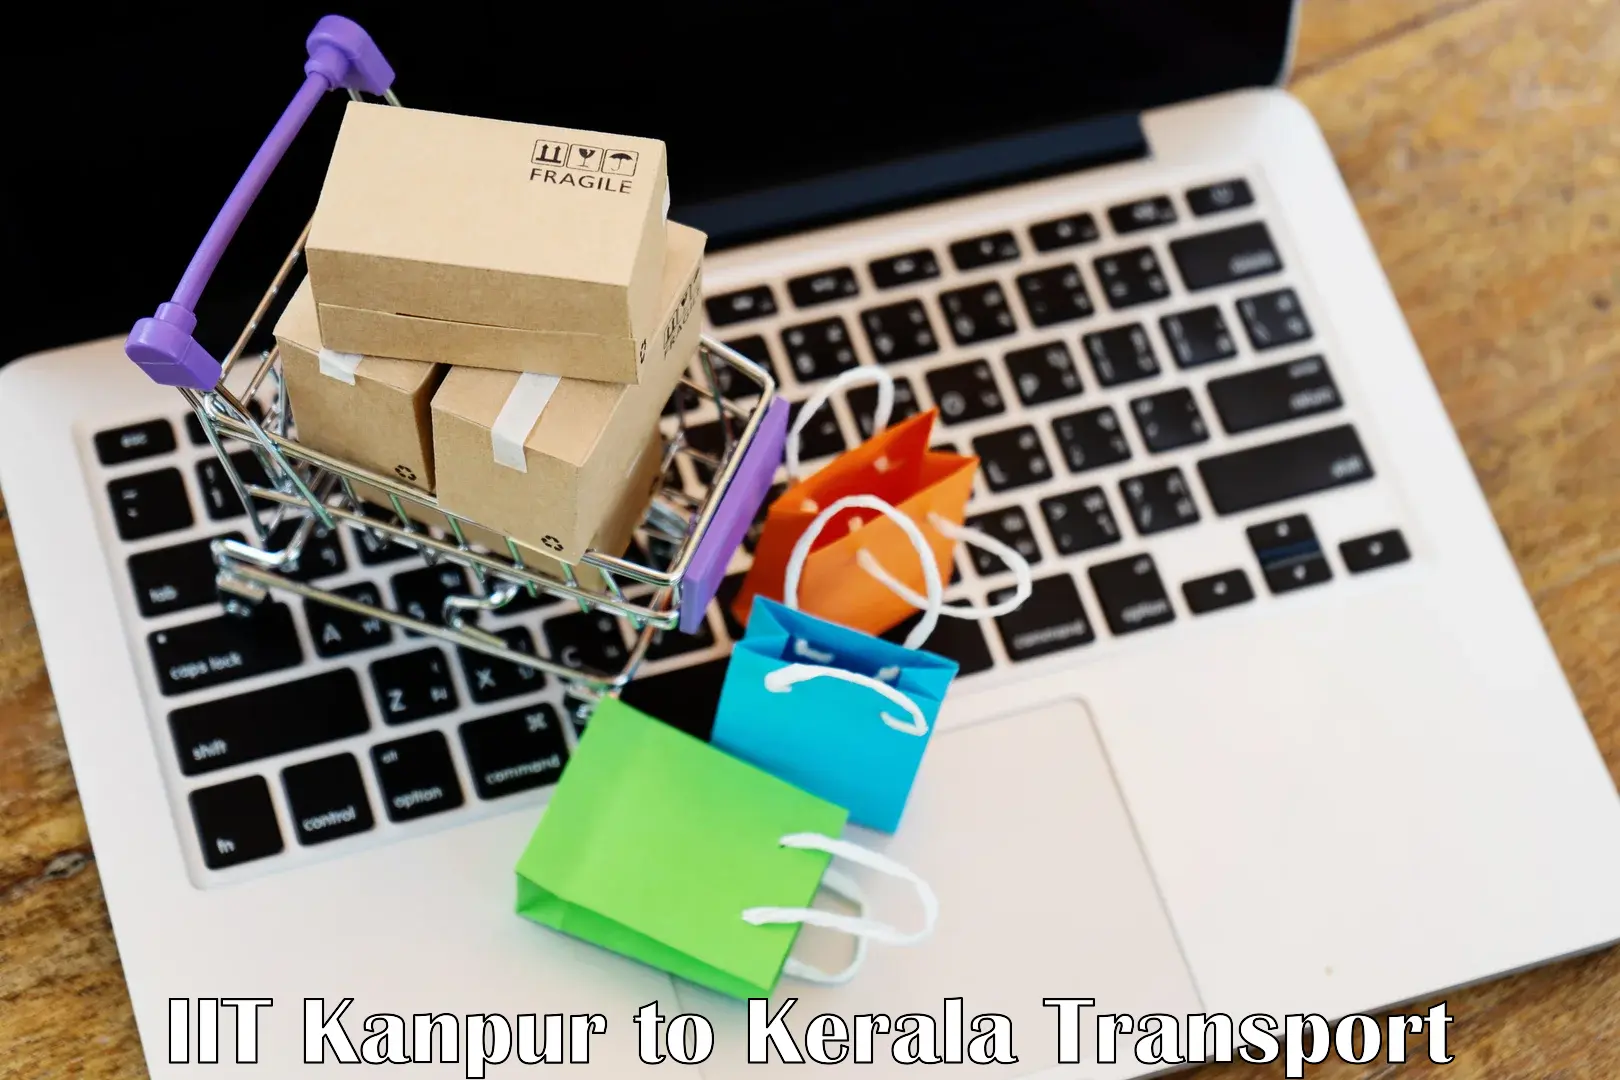 Transport in sharing IIT Kanpur to Balussery